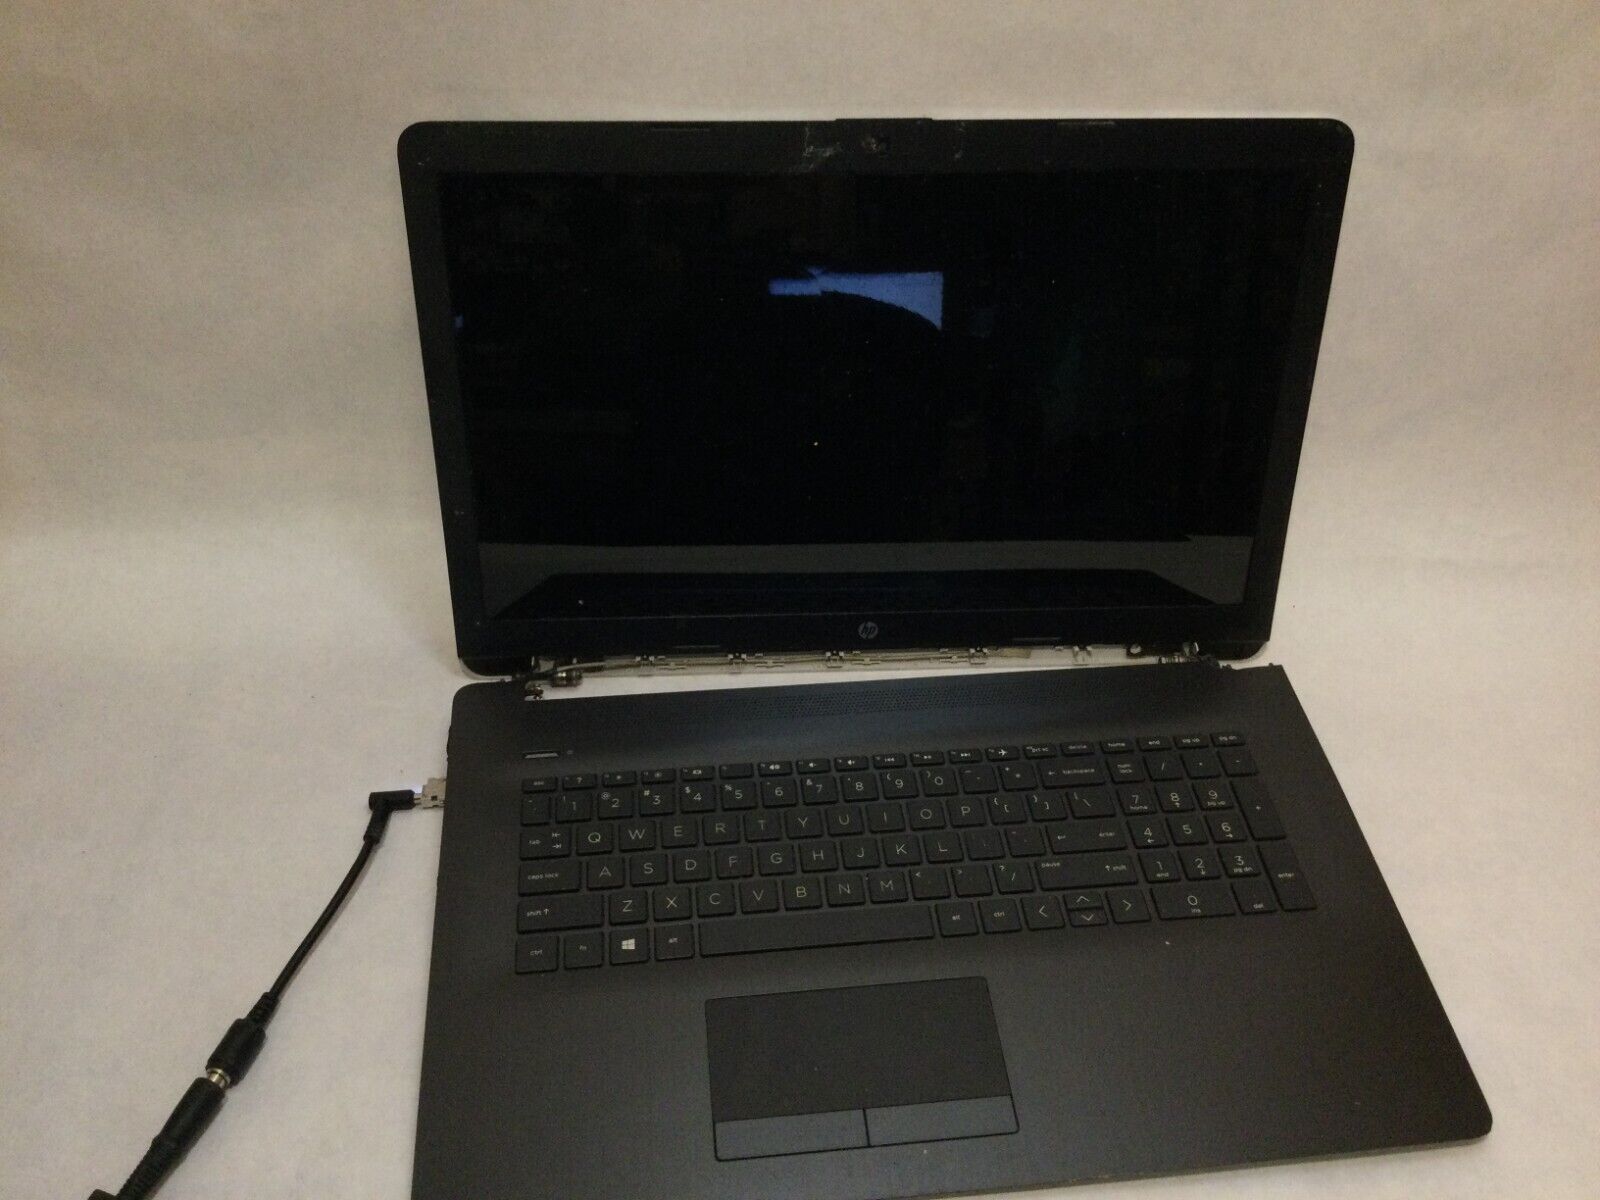 HP Pavilion 17z-ca000 17.3” / UNKNOWN SPECIFICATIONS / (POWERS ON/NO BOOT) MR